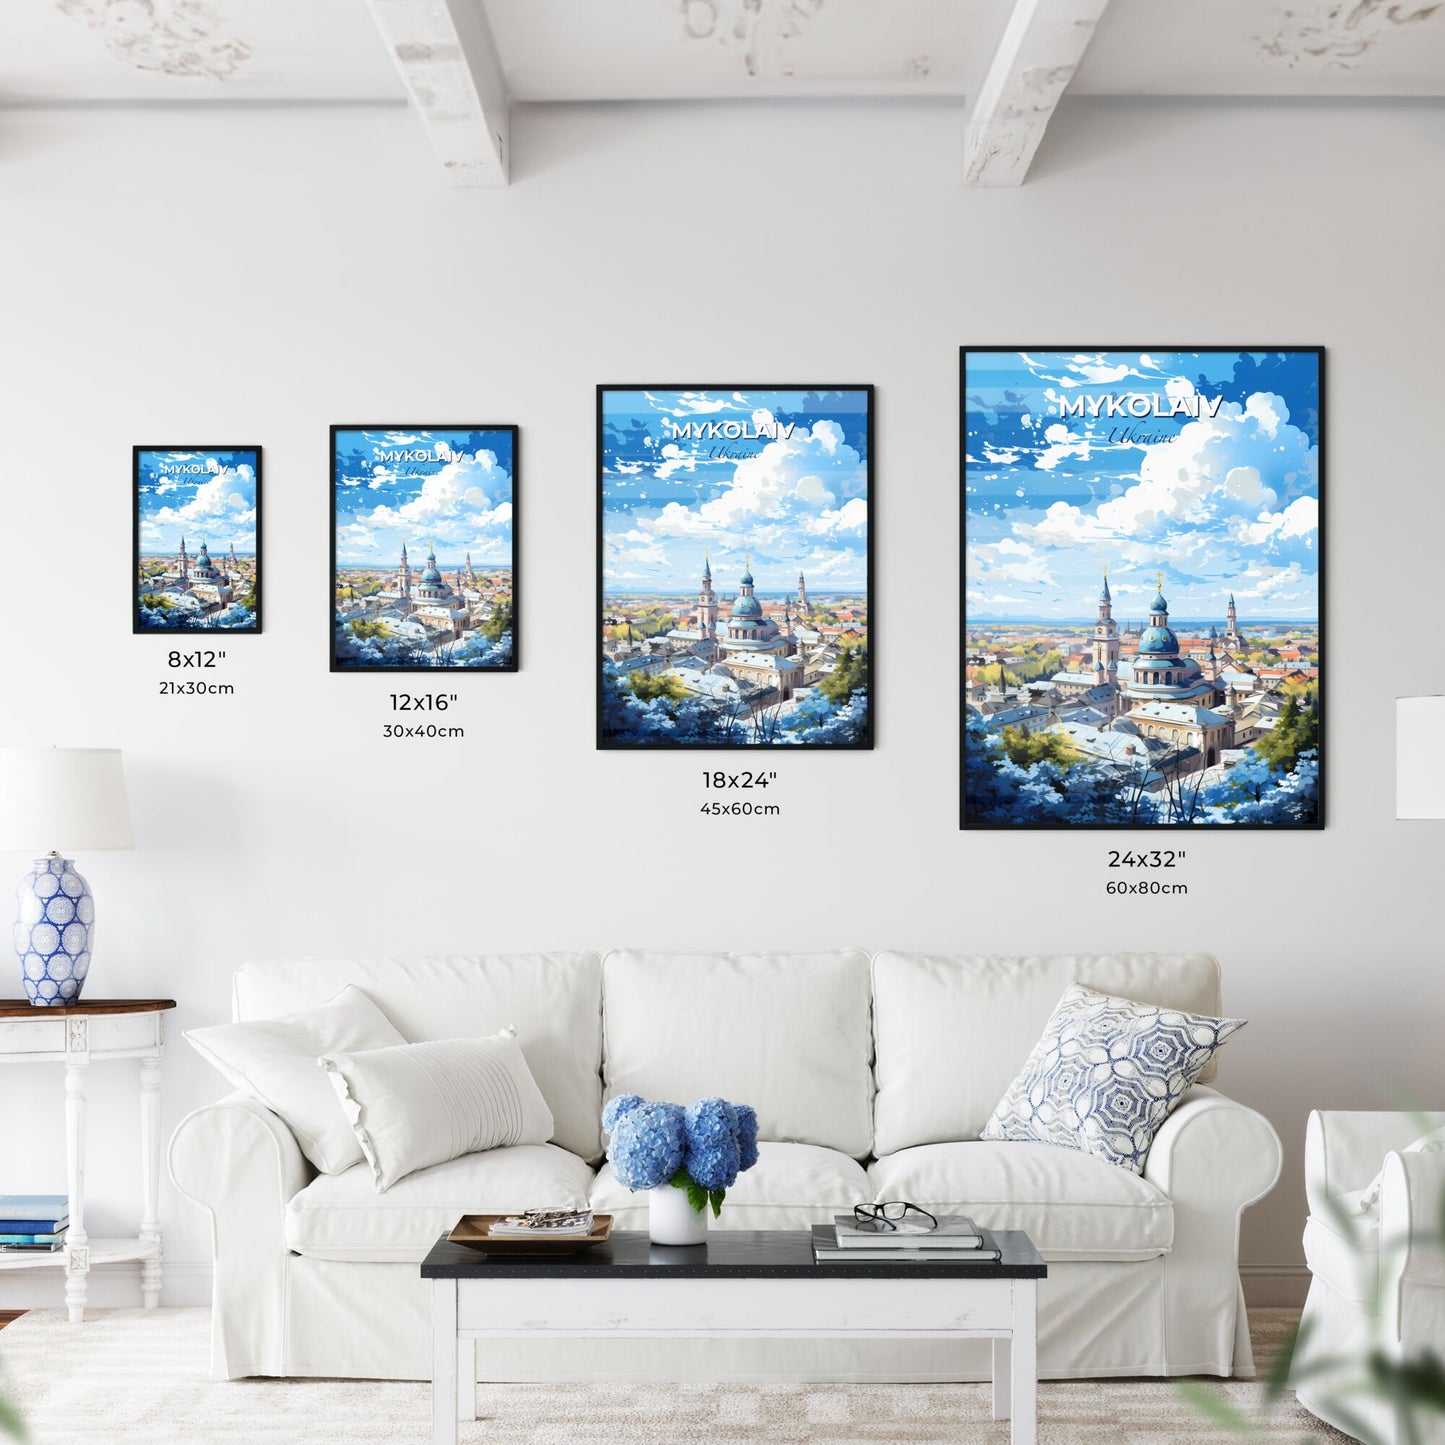 Mykolaiv Ukraine Skyline - A City With Blue Domes And Towers - Customizable Travel Gift Default Title